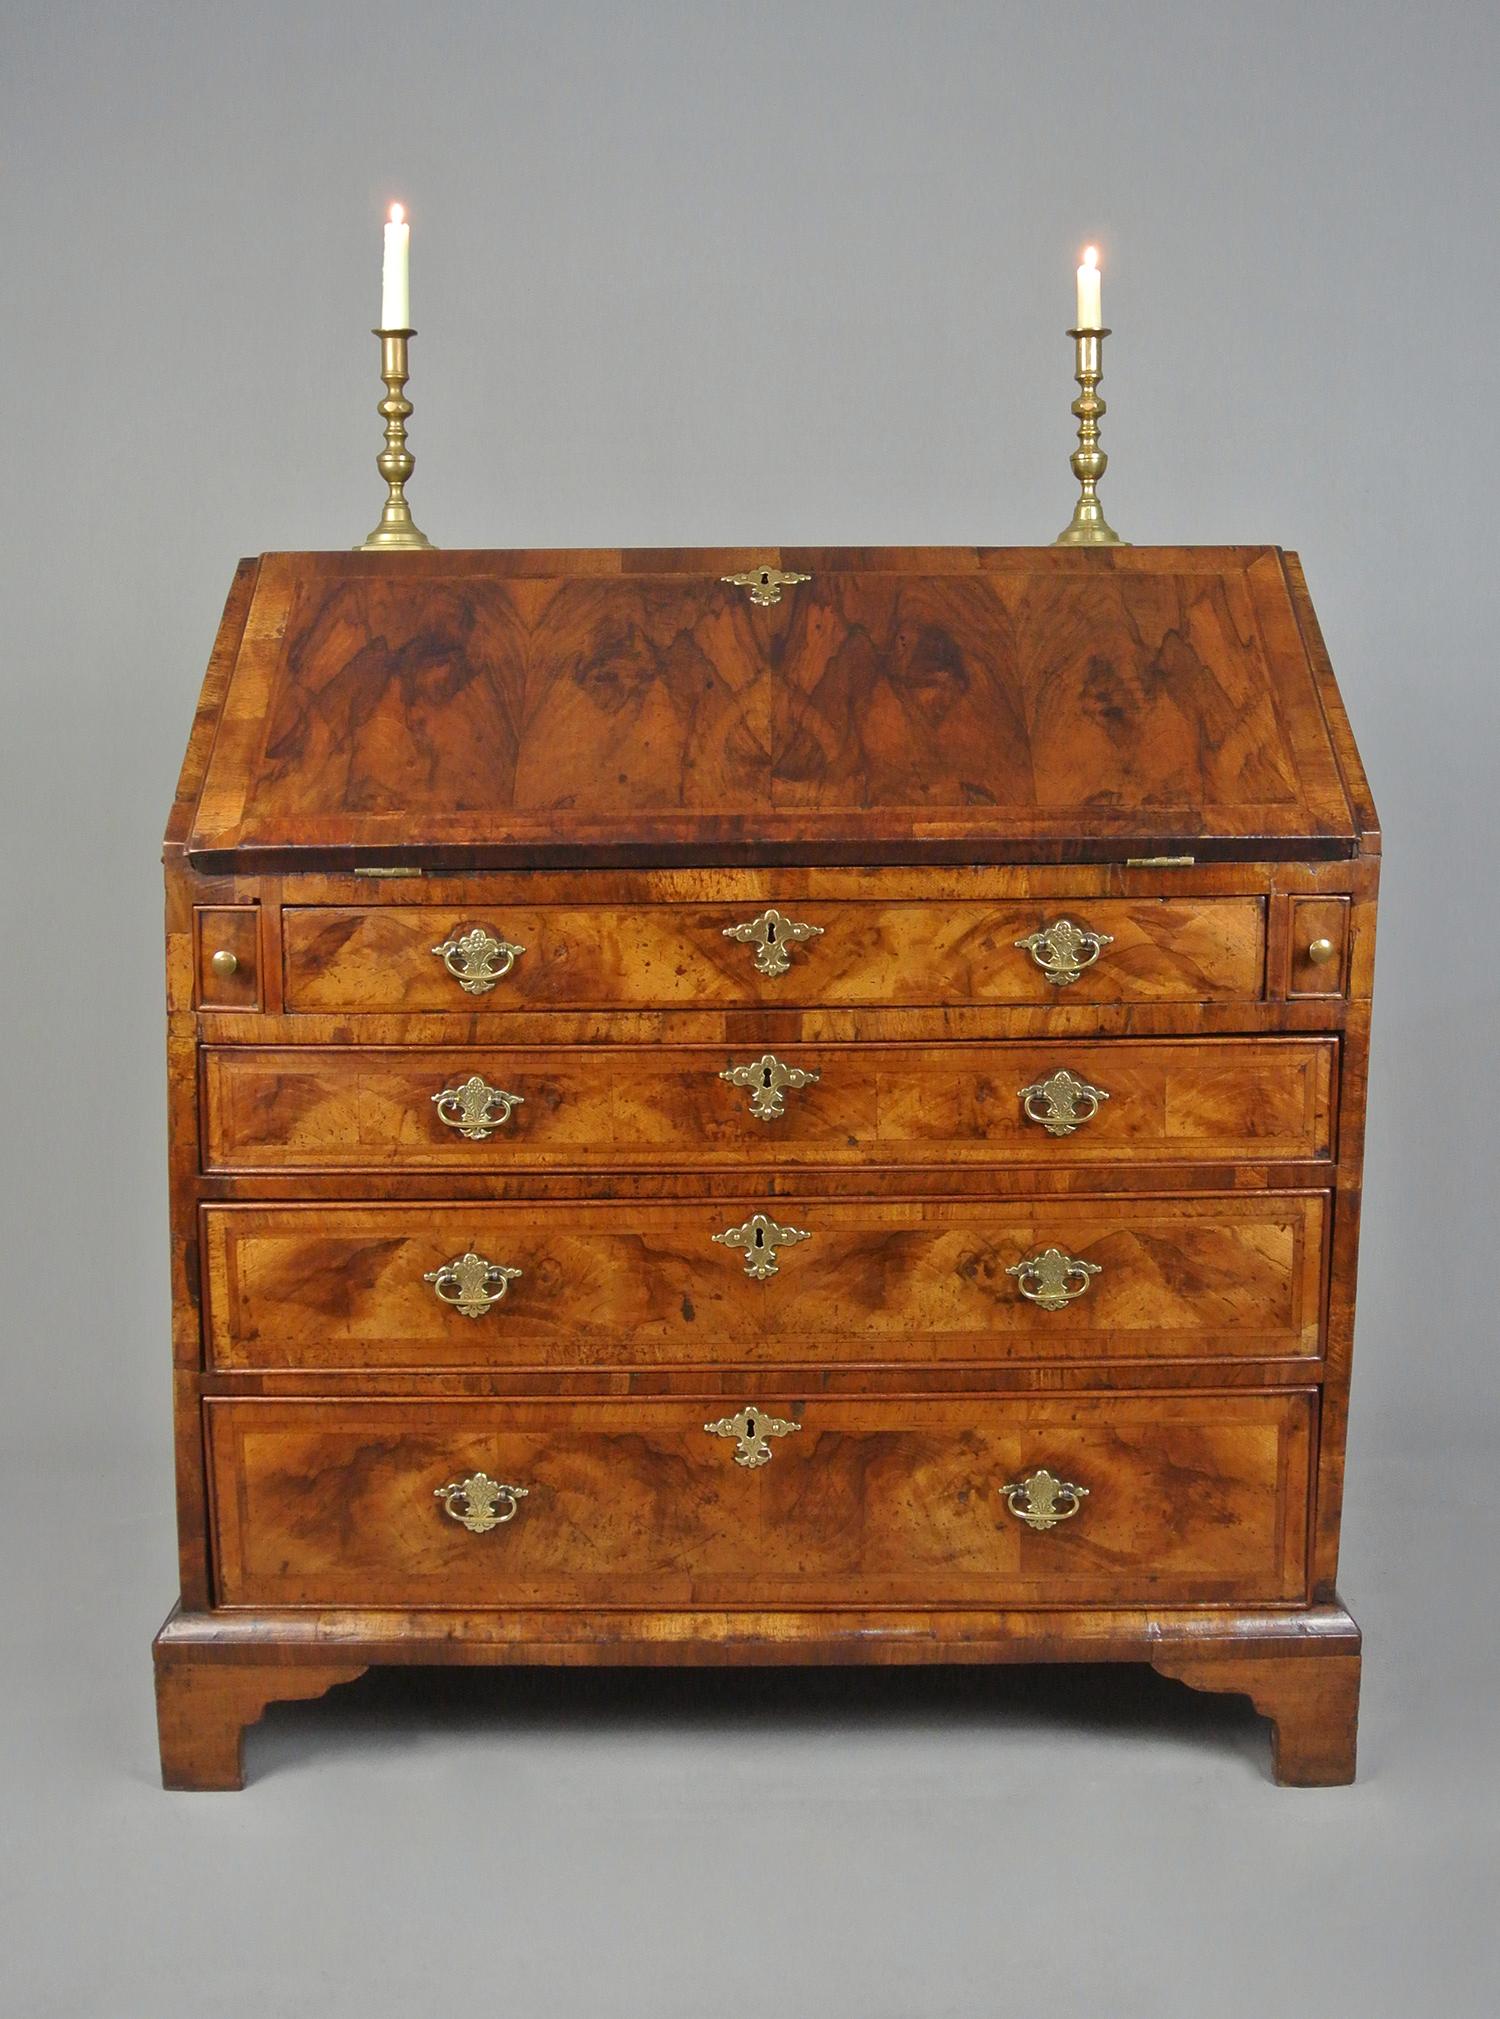 With a fantastic colour, and in rarely seen Yew wood, this beautiful bureau dates from the reign of George II c. 1750.

With oak lined drawers and a handsome interior of small walnut drawers and pigeon holes and a door with figured walnut inlaid